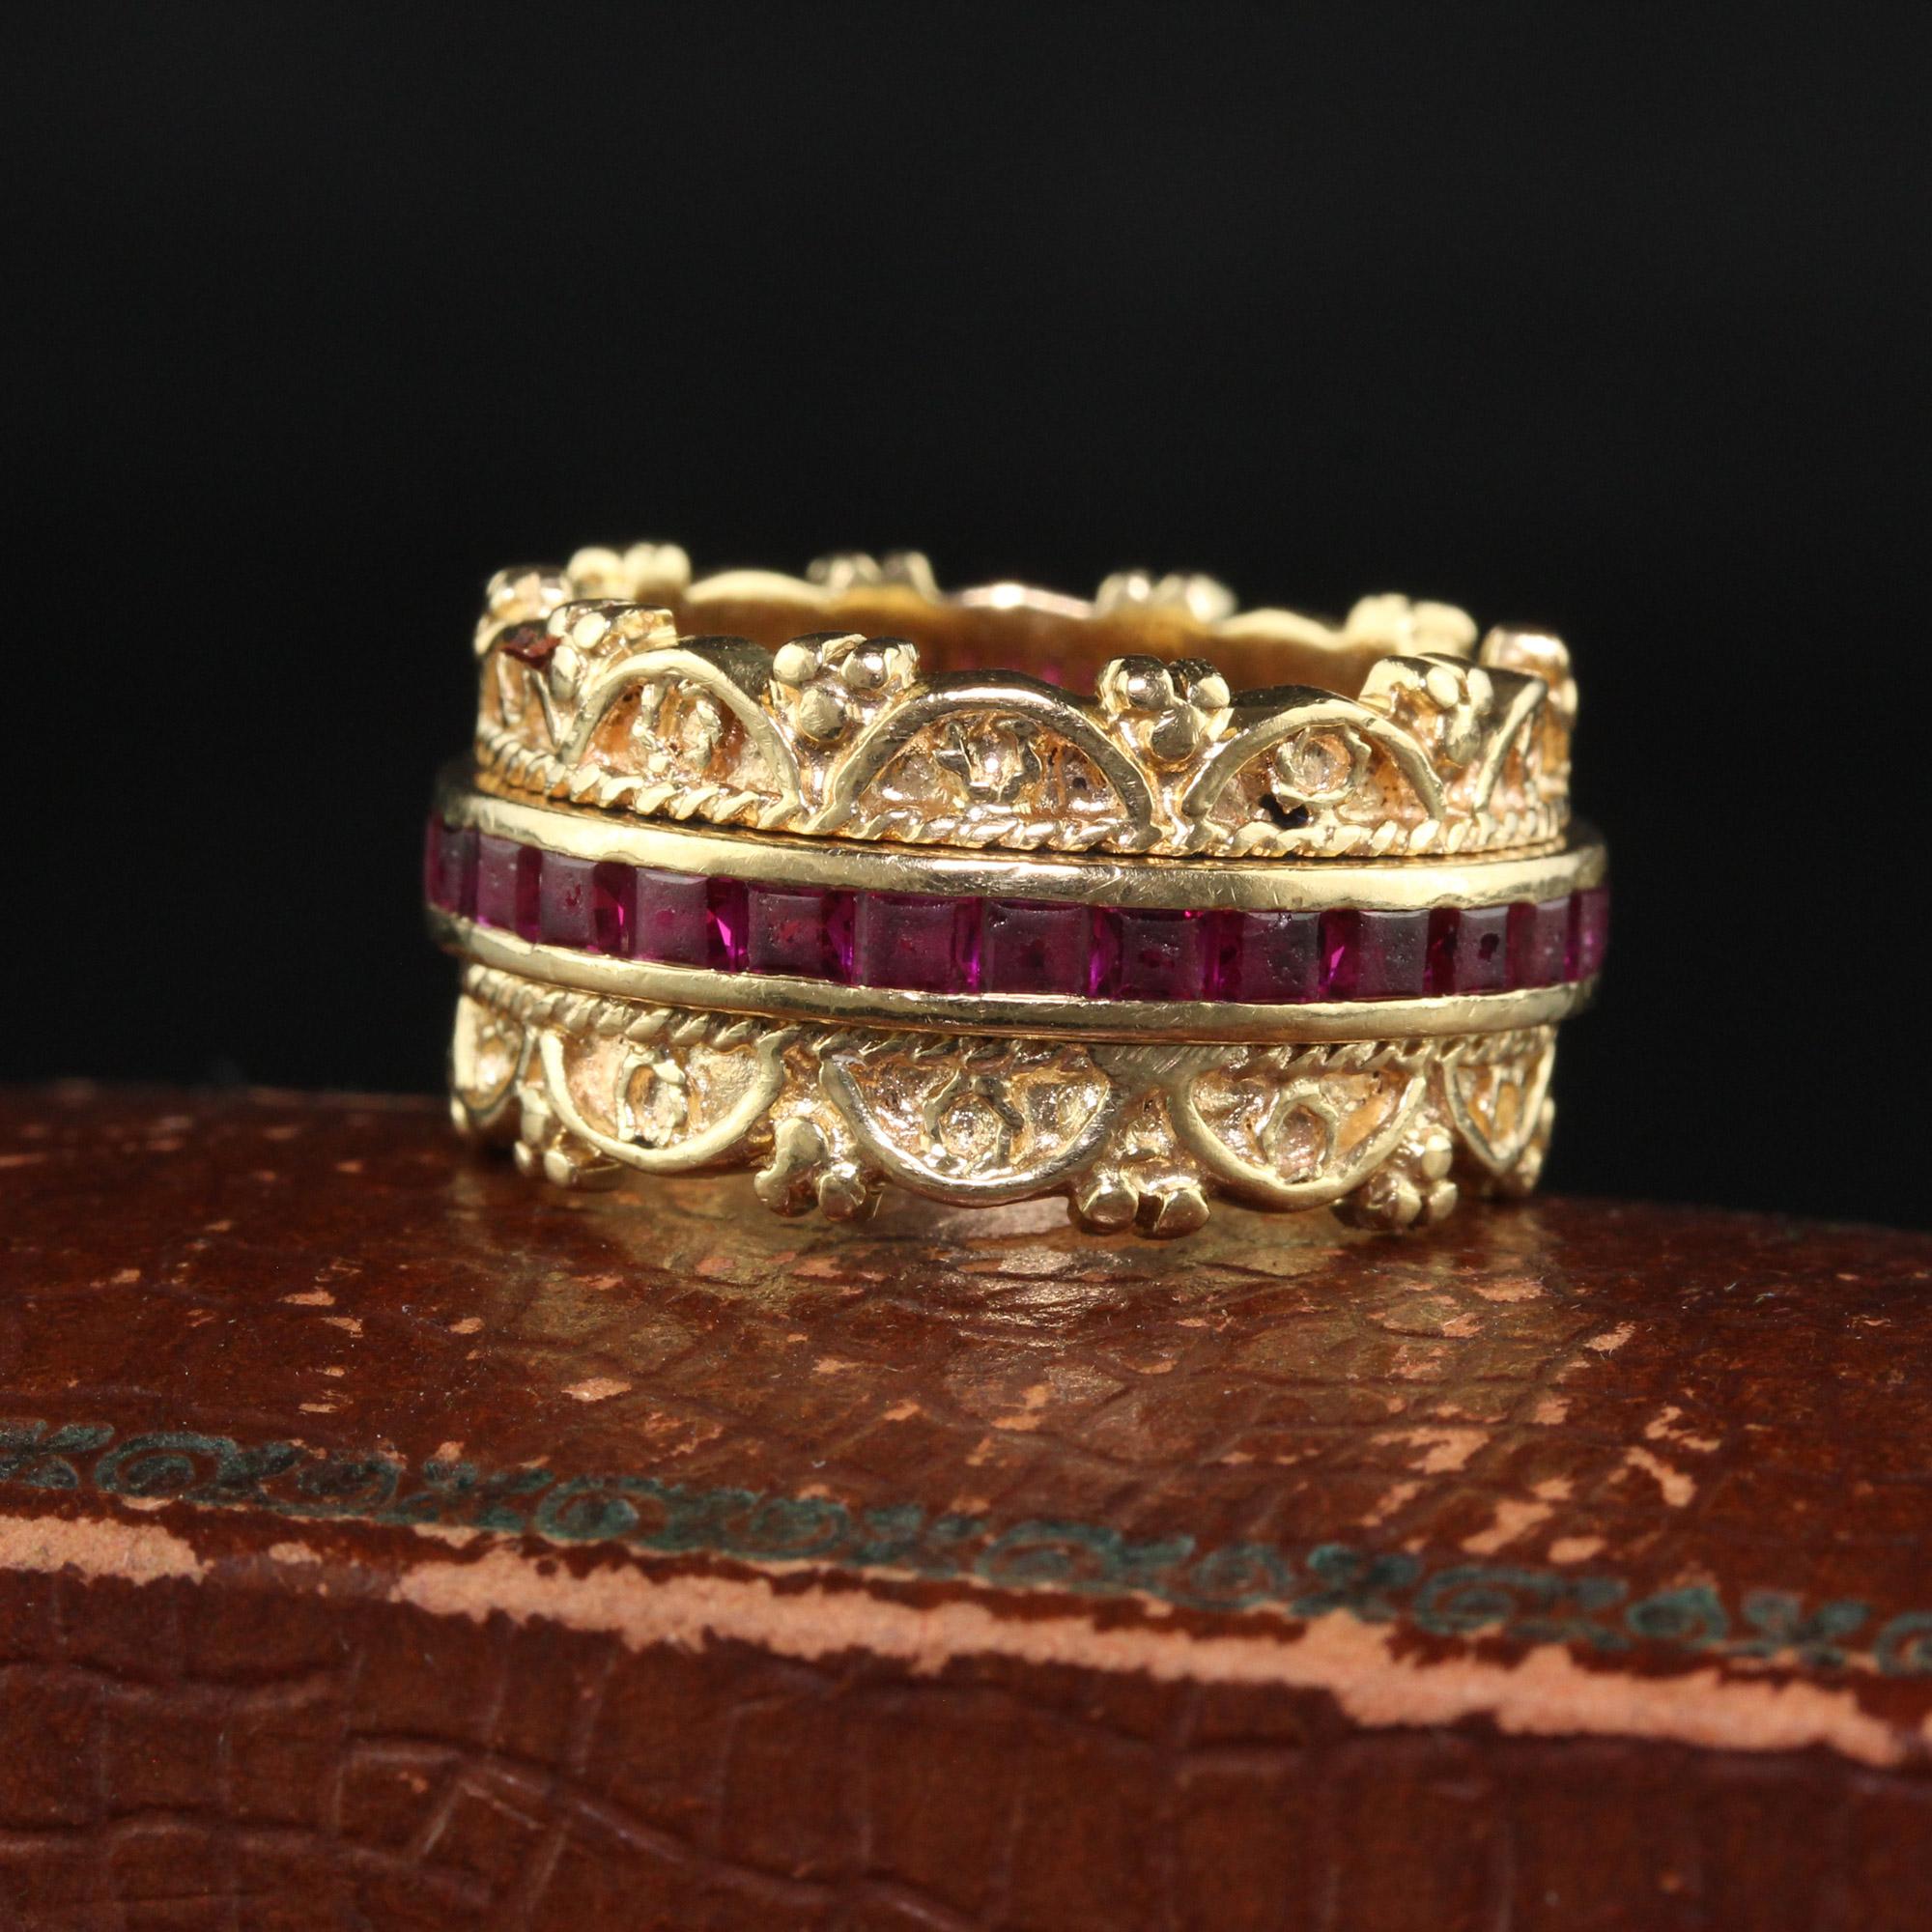 Beautiful Vintage Estate 14K Yellow Gold Square Cut Ruby Wide Eternity Band - Size 6 1/4. This gorgeous wedding band is crafted in 14k yellow gold. The ring has an intricate design with a row of square cut rubies in the center. The ring is in good